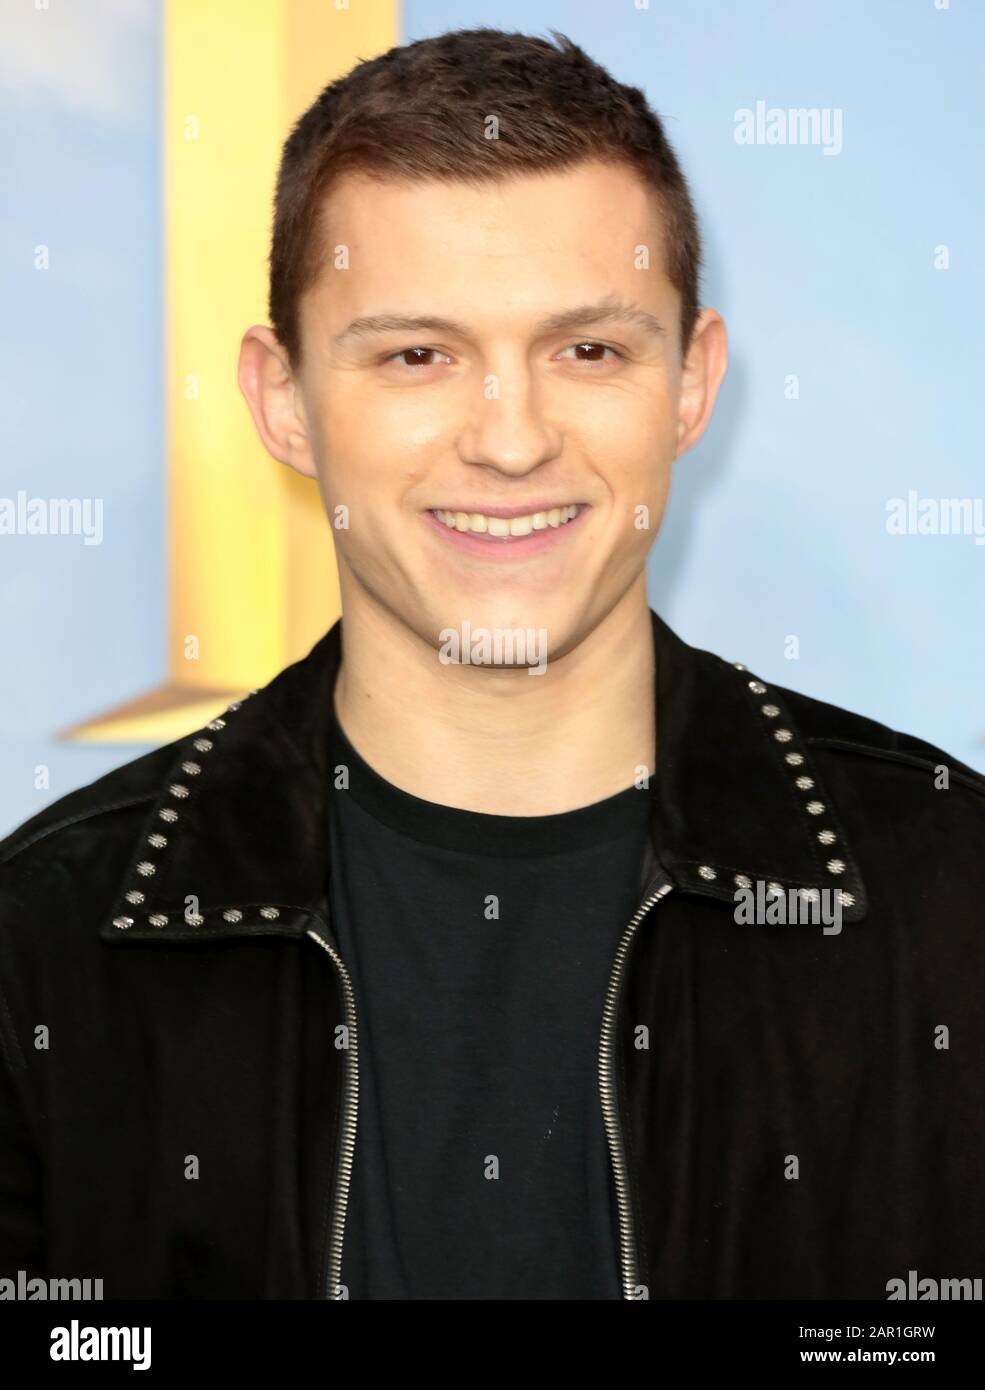 Jan 25, 2020 - London, England, UK - Tom Holland attending  Dolittle special film screening, Cineworld Leicester Square - Stock Photo